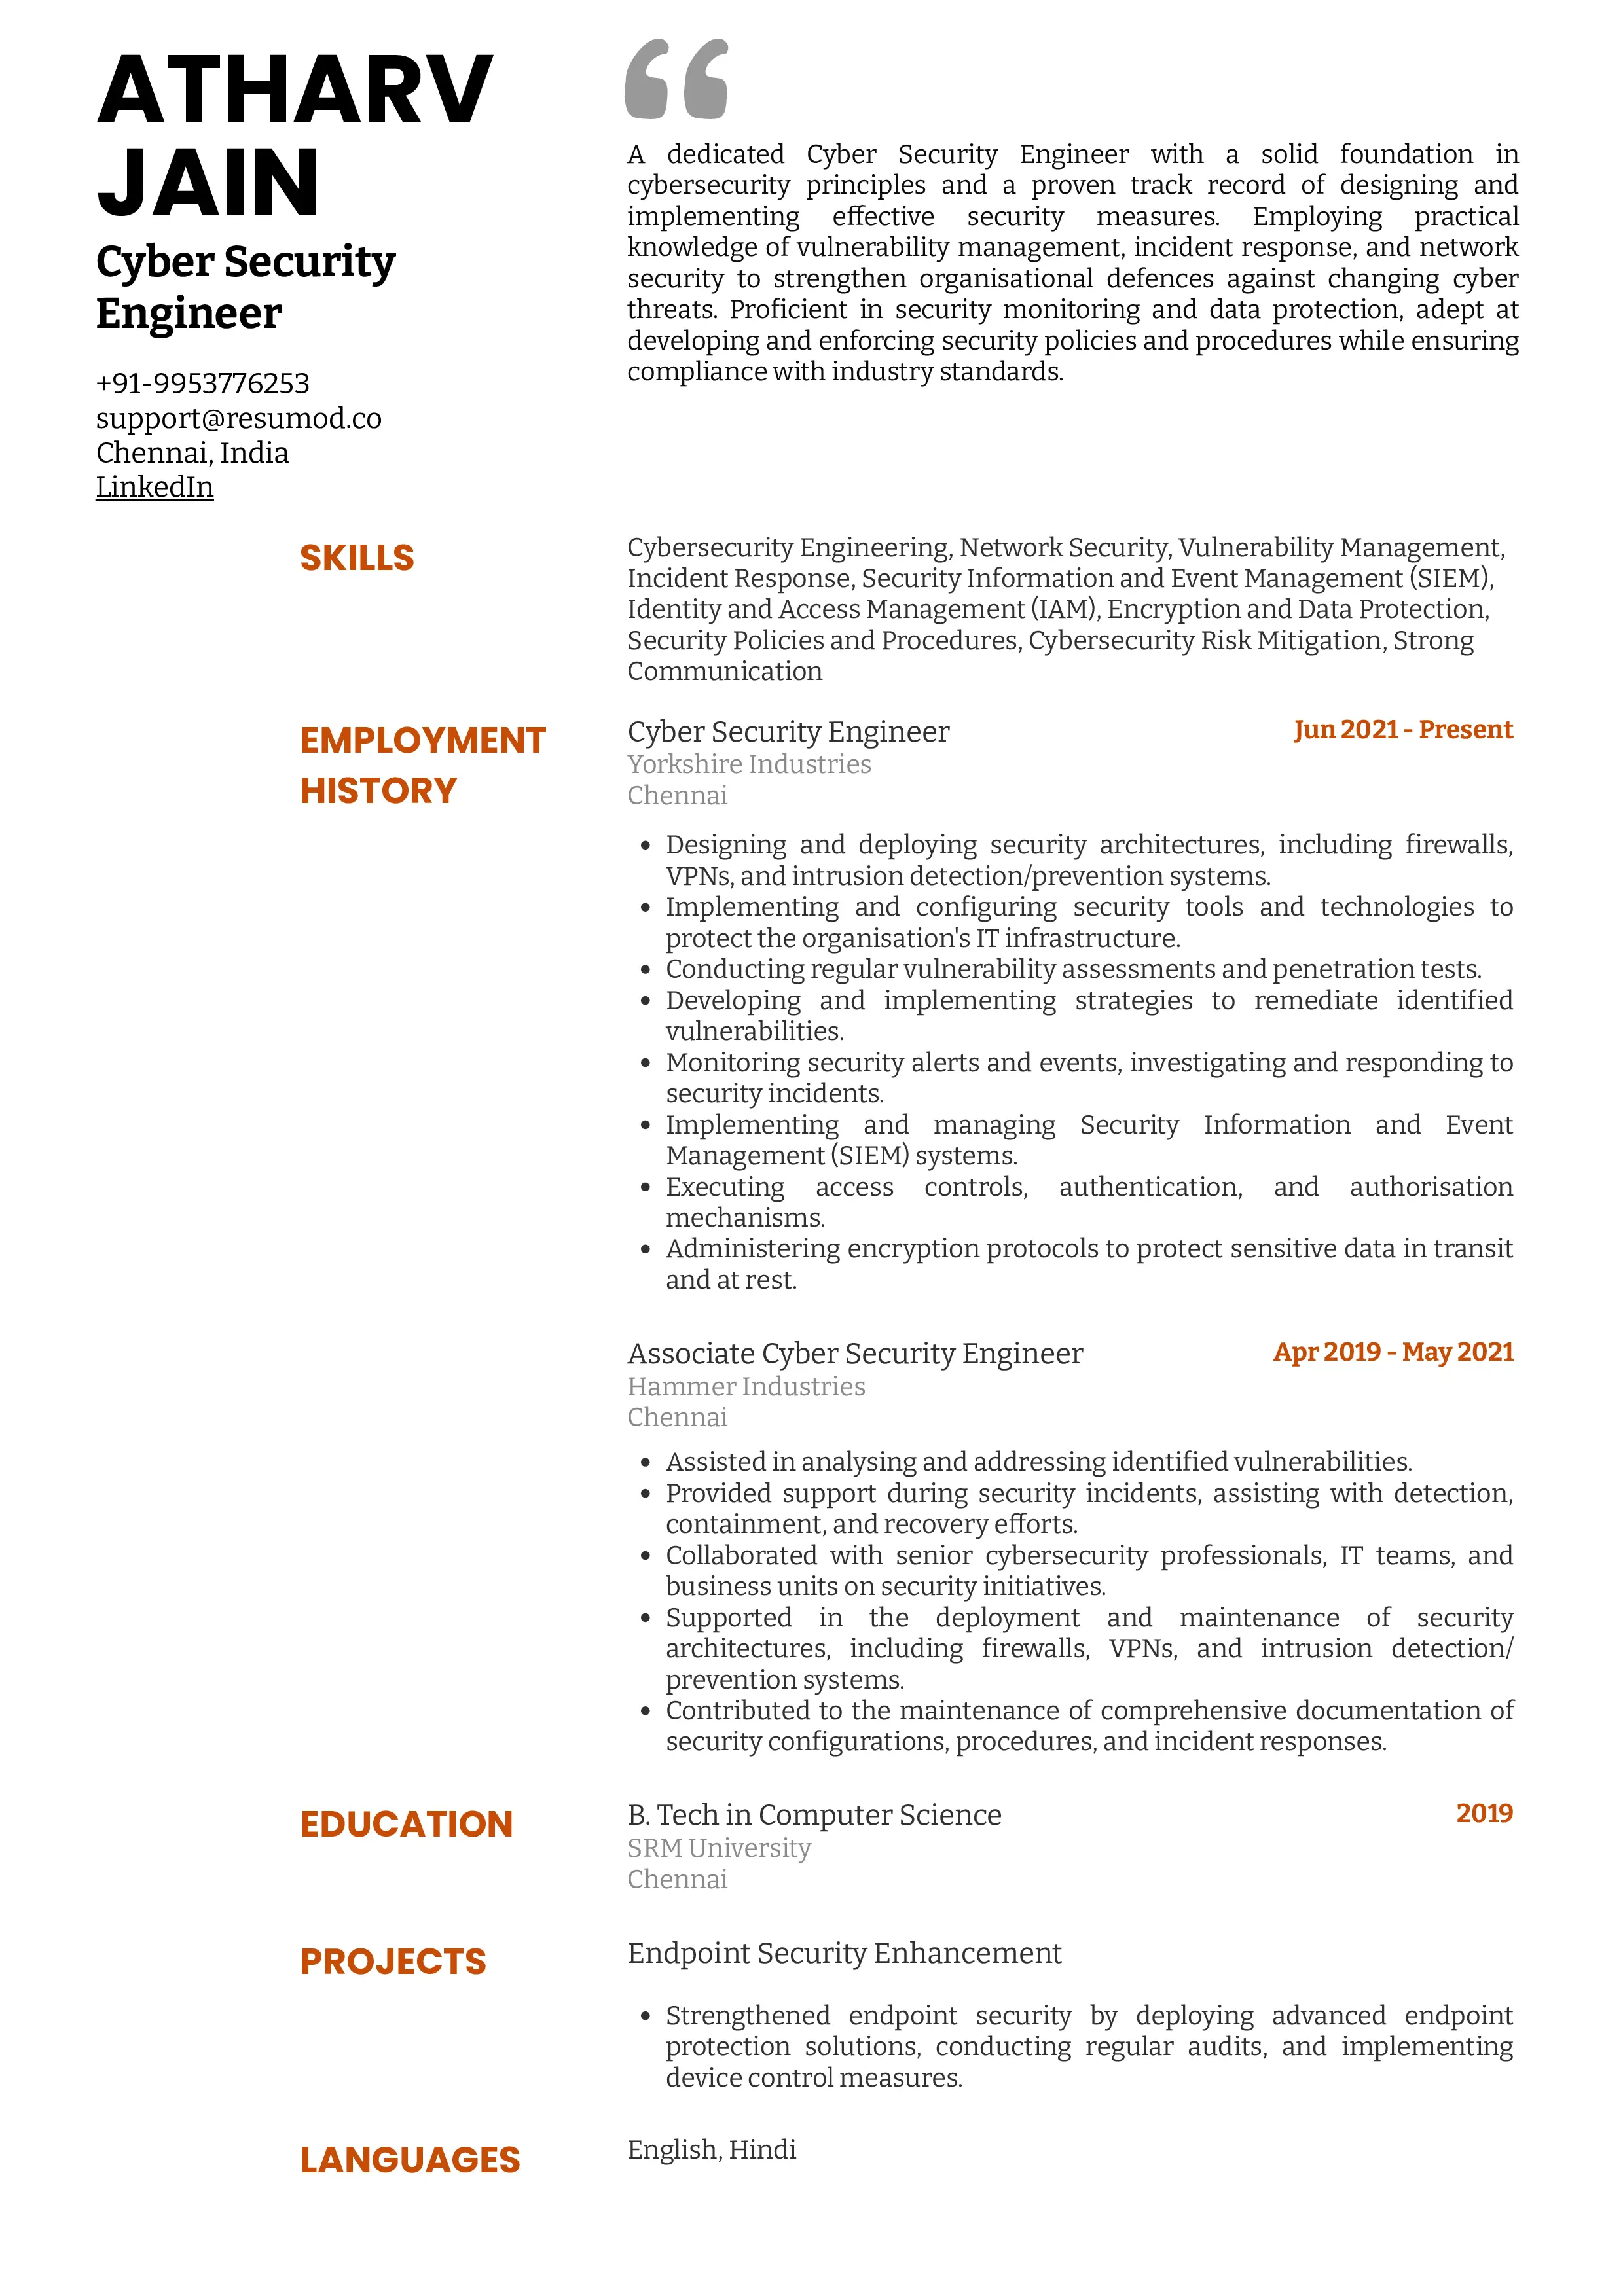 Sample Resume of Cyber Security Engineer | Free Resume Templates & Samples on Resumod.co